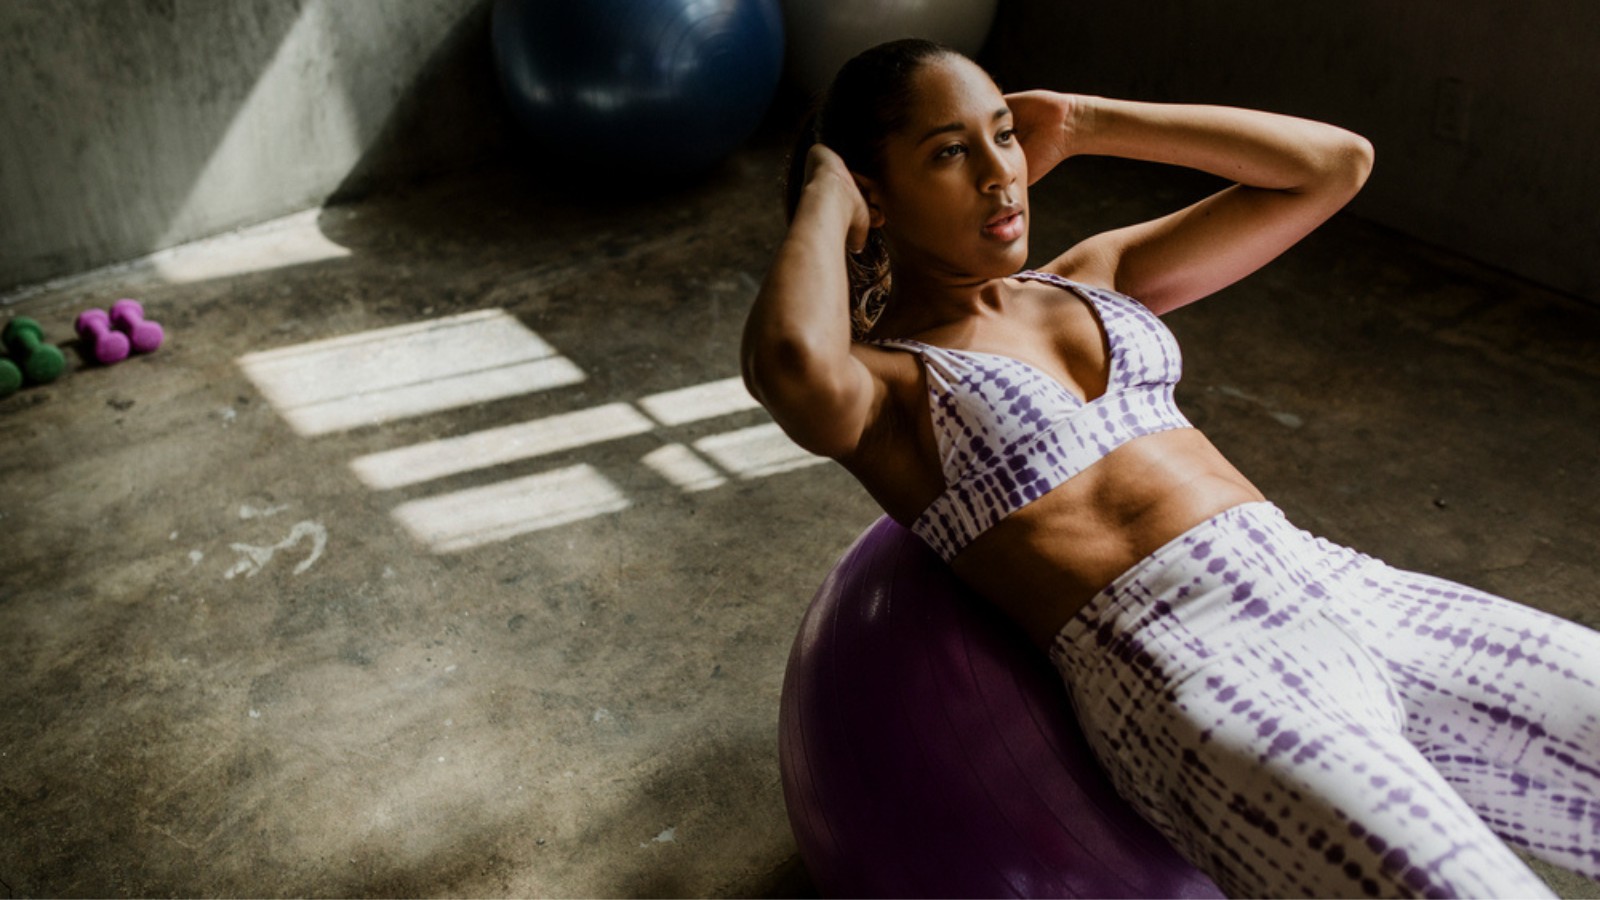 This Total-Body Exercise Ball Workout Will Make Your Abs Work Overtime